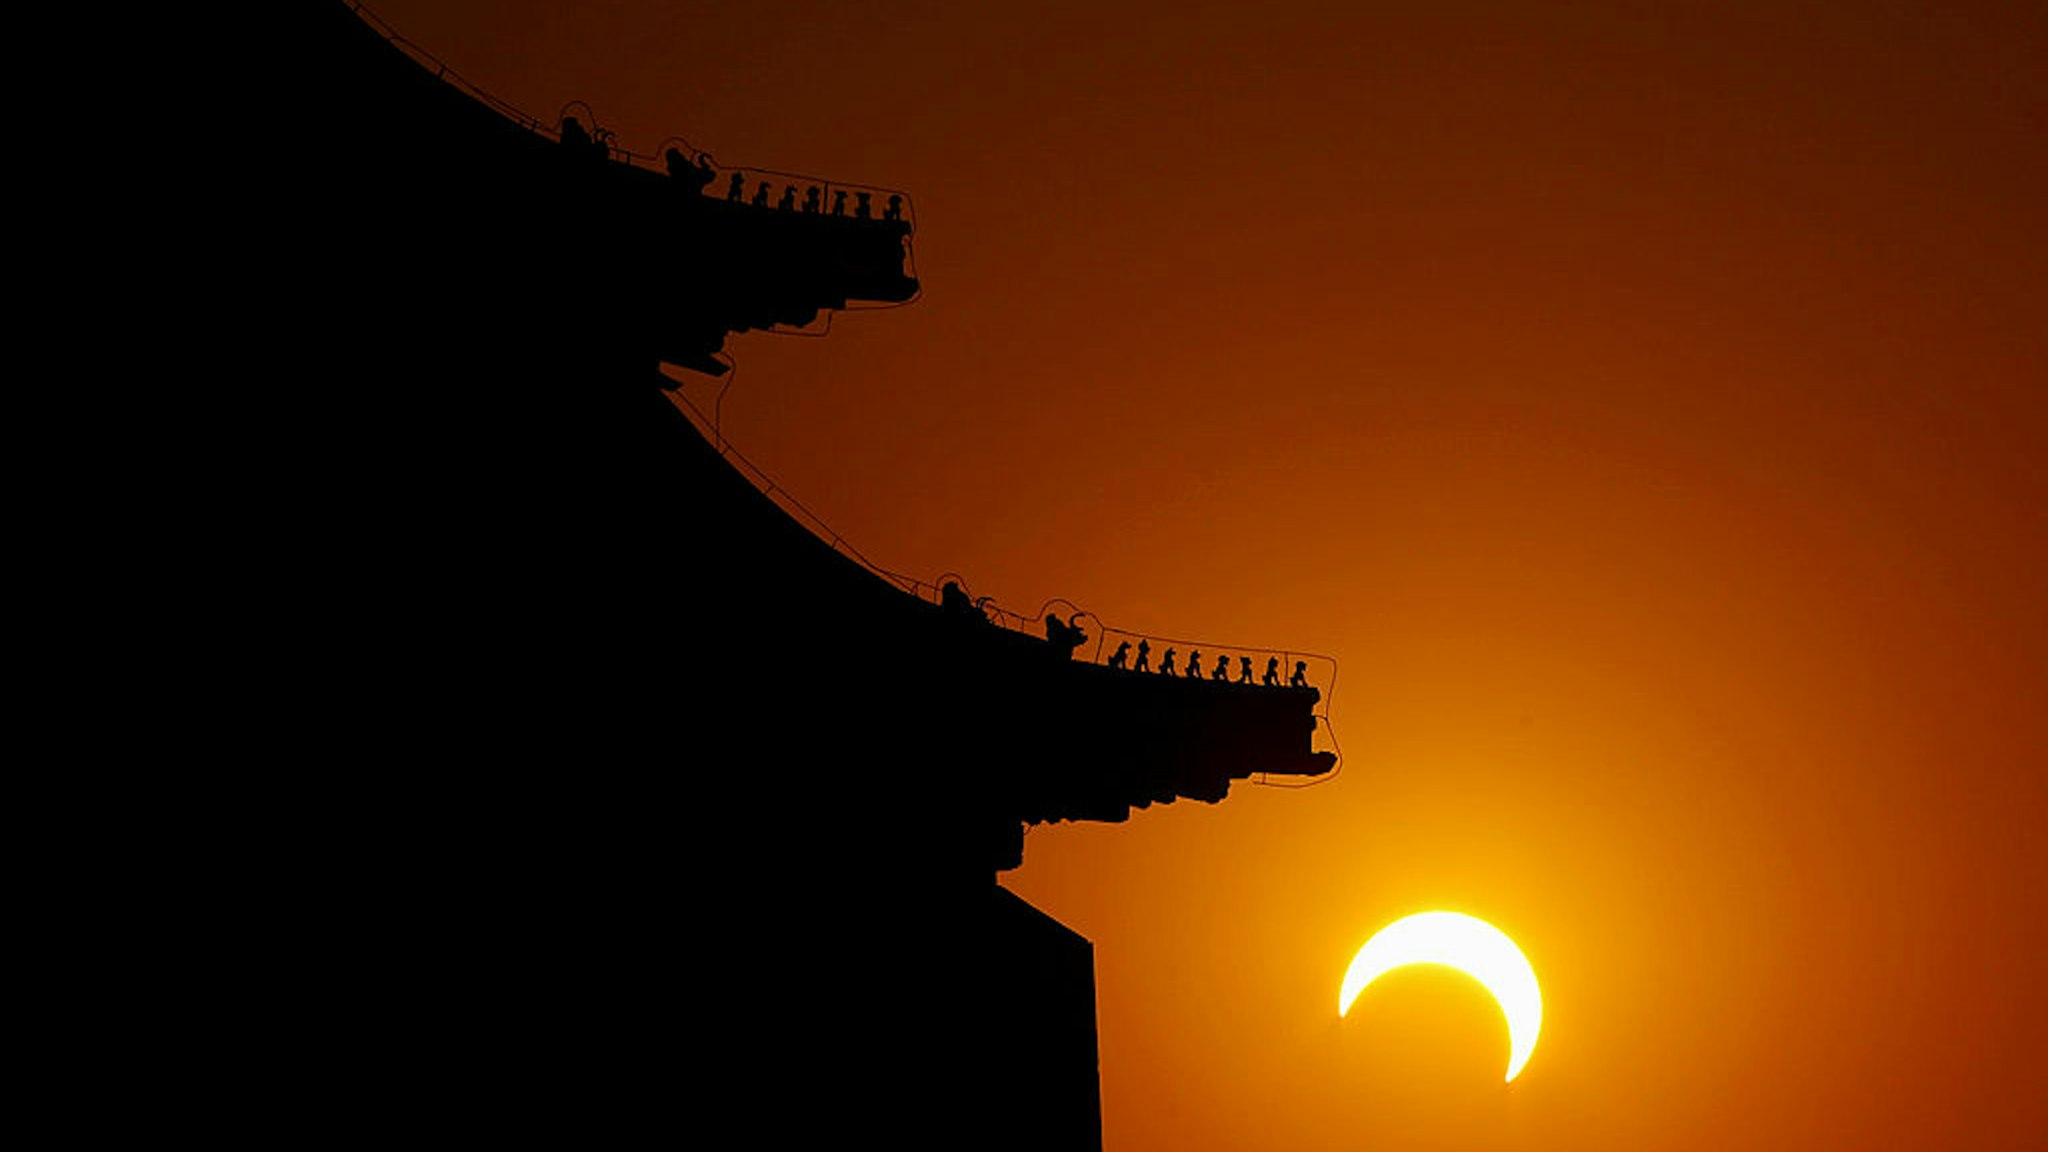 BEIJING - JANUARY 15: The moon begins to obstruct the view of the sun from earth during a soloar eclipse at the Tian'anmen Square on January 15, 2010 in Shenyang, Liaoning Province of China. The eclipse, which first became visible in Tamil Nadu city of Kanyakumari, is predicted to be the longest of its kind for the next 1000 years. (Photo by